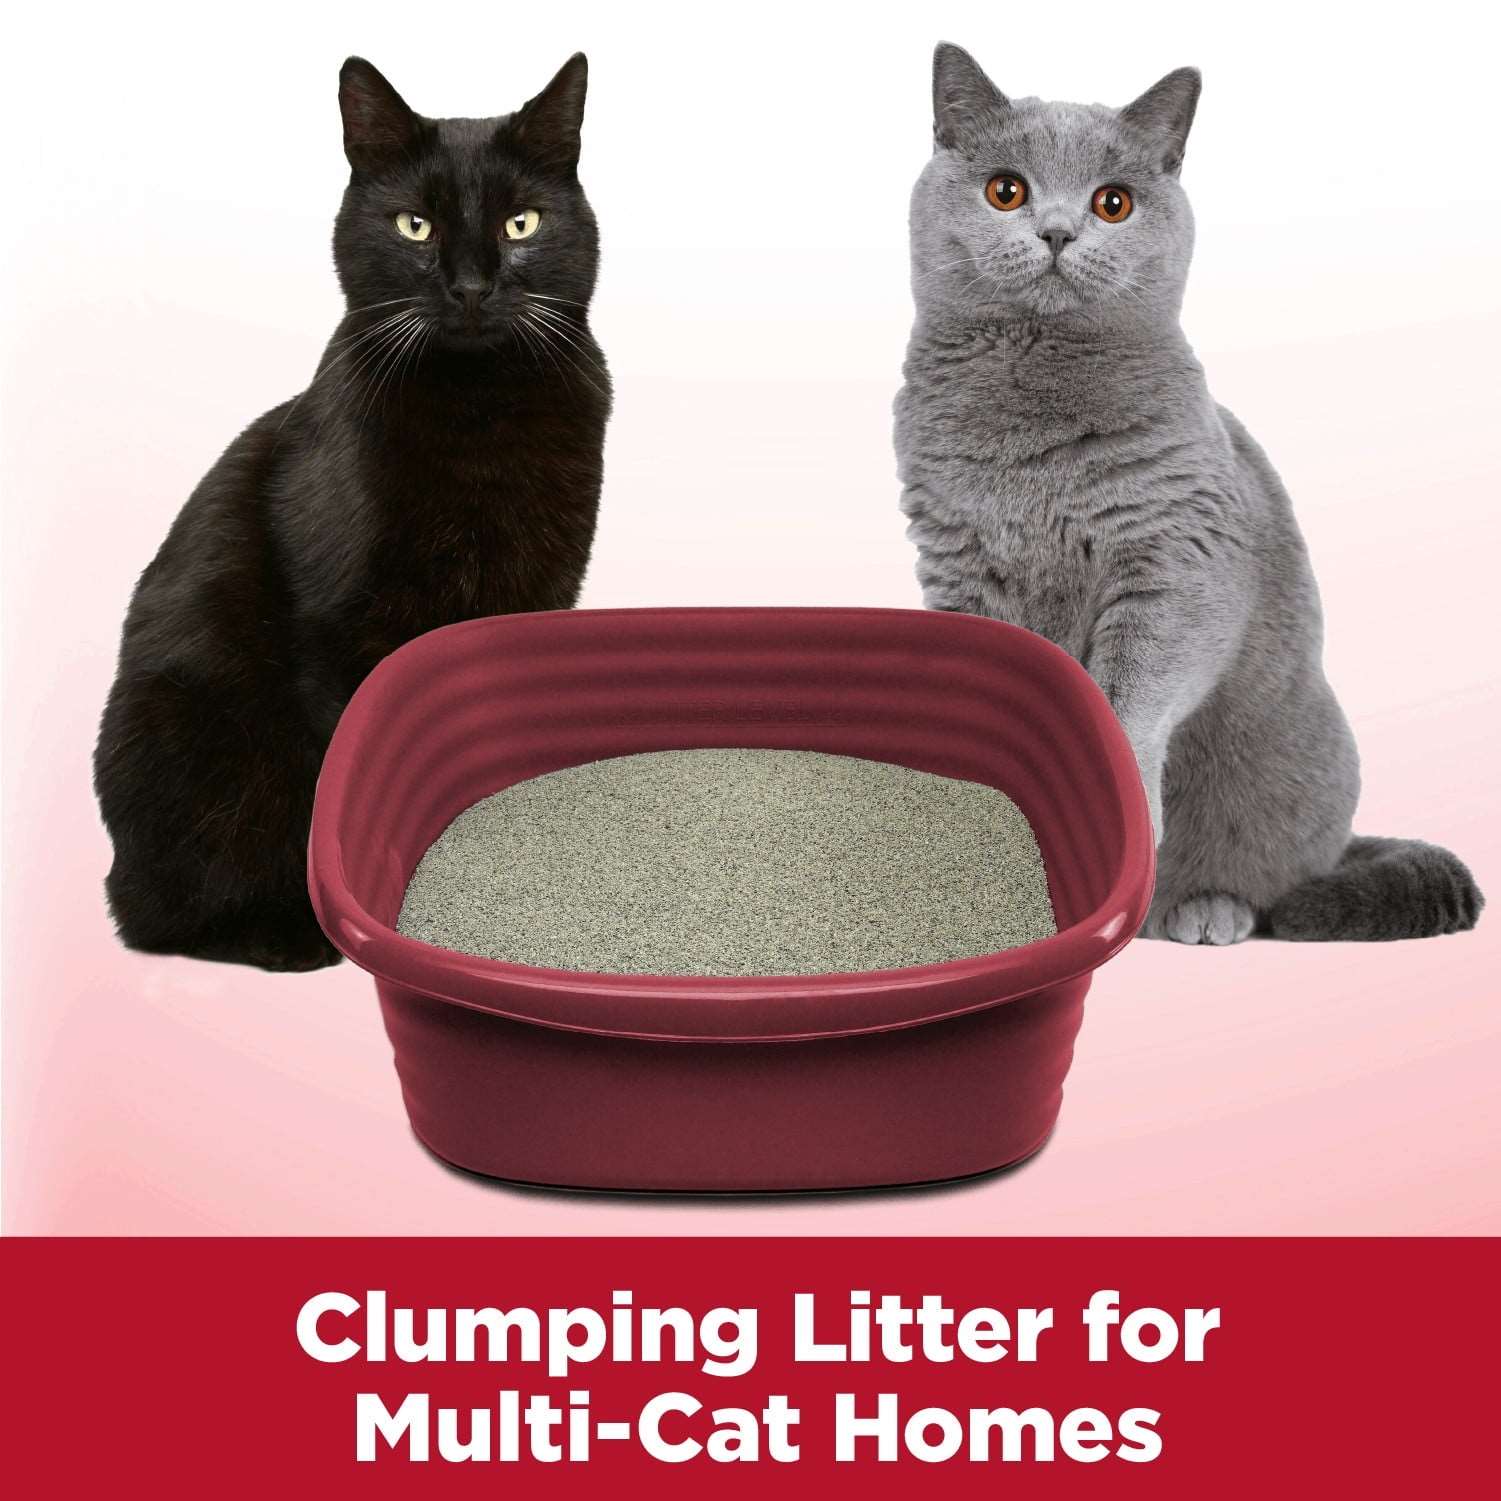 Wholesale prices with free shipping all over United States Arm & Hammer Clump Seal Multi-Cat Complete Odor Sealing Clumping Cat Litter, 38lb - Steven Deals